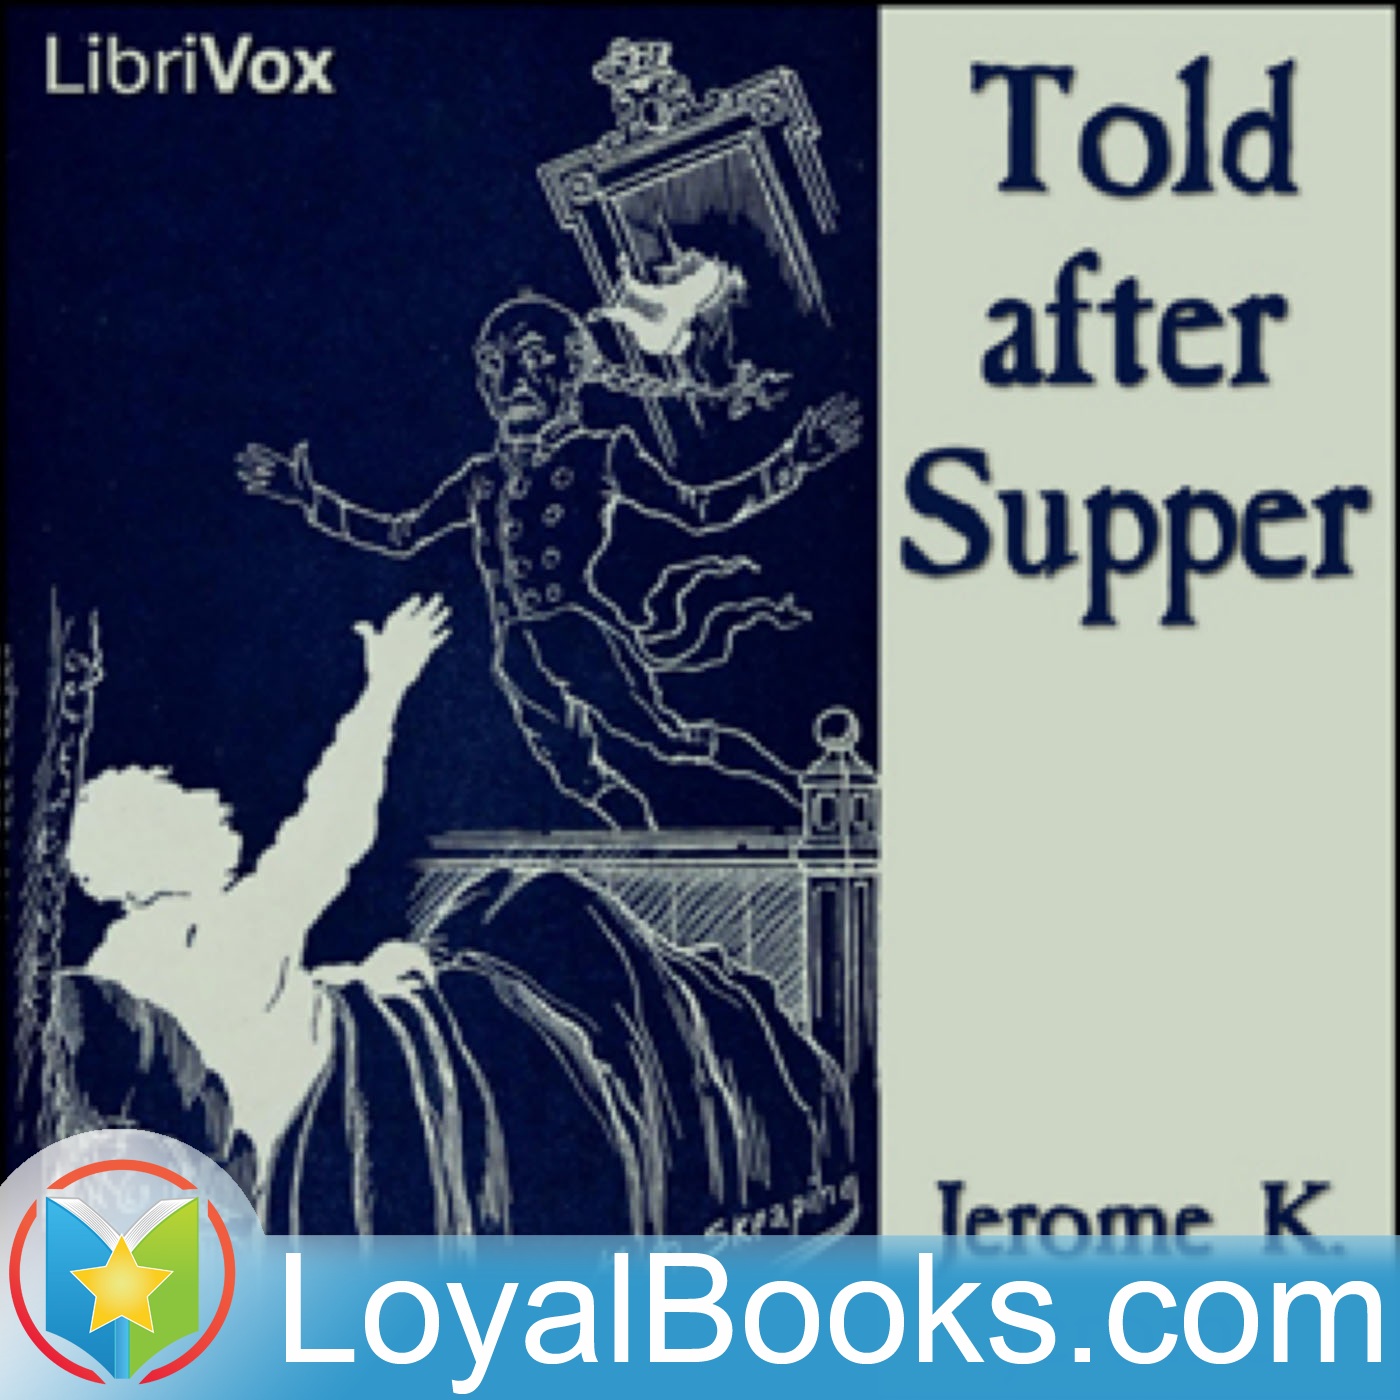 Told after Supper by Jerome K. Jerome